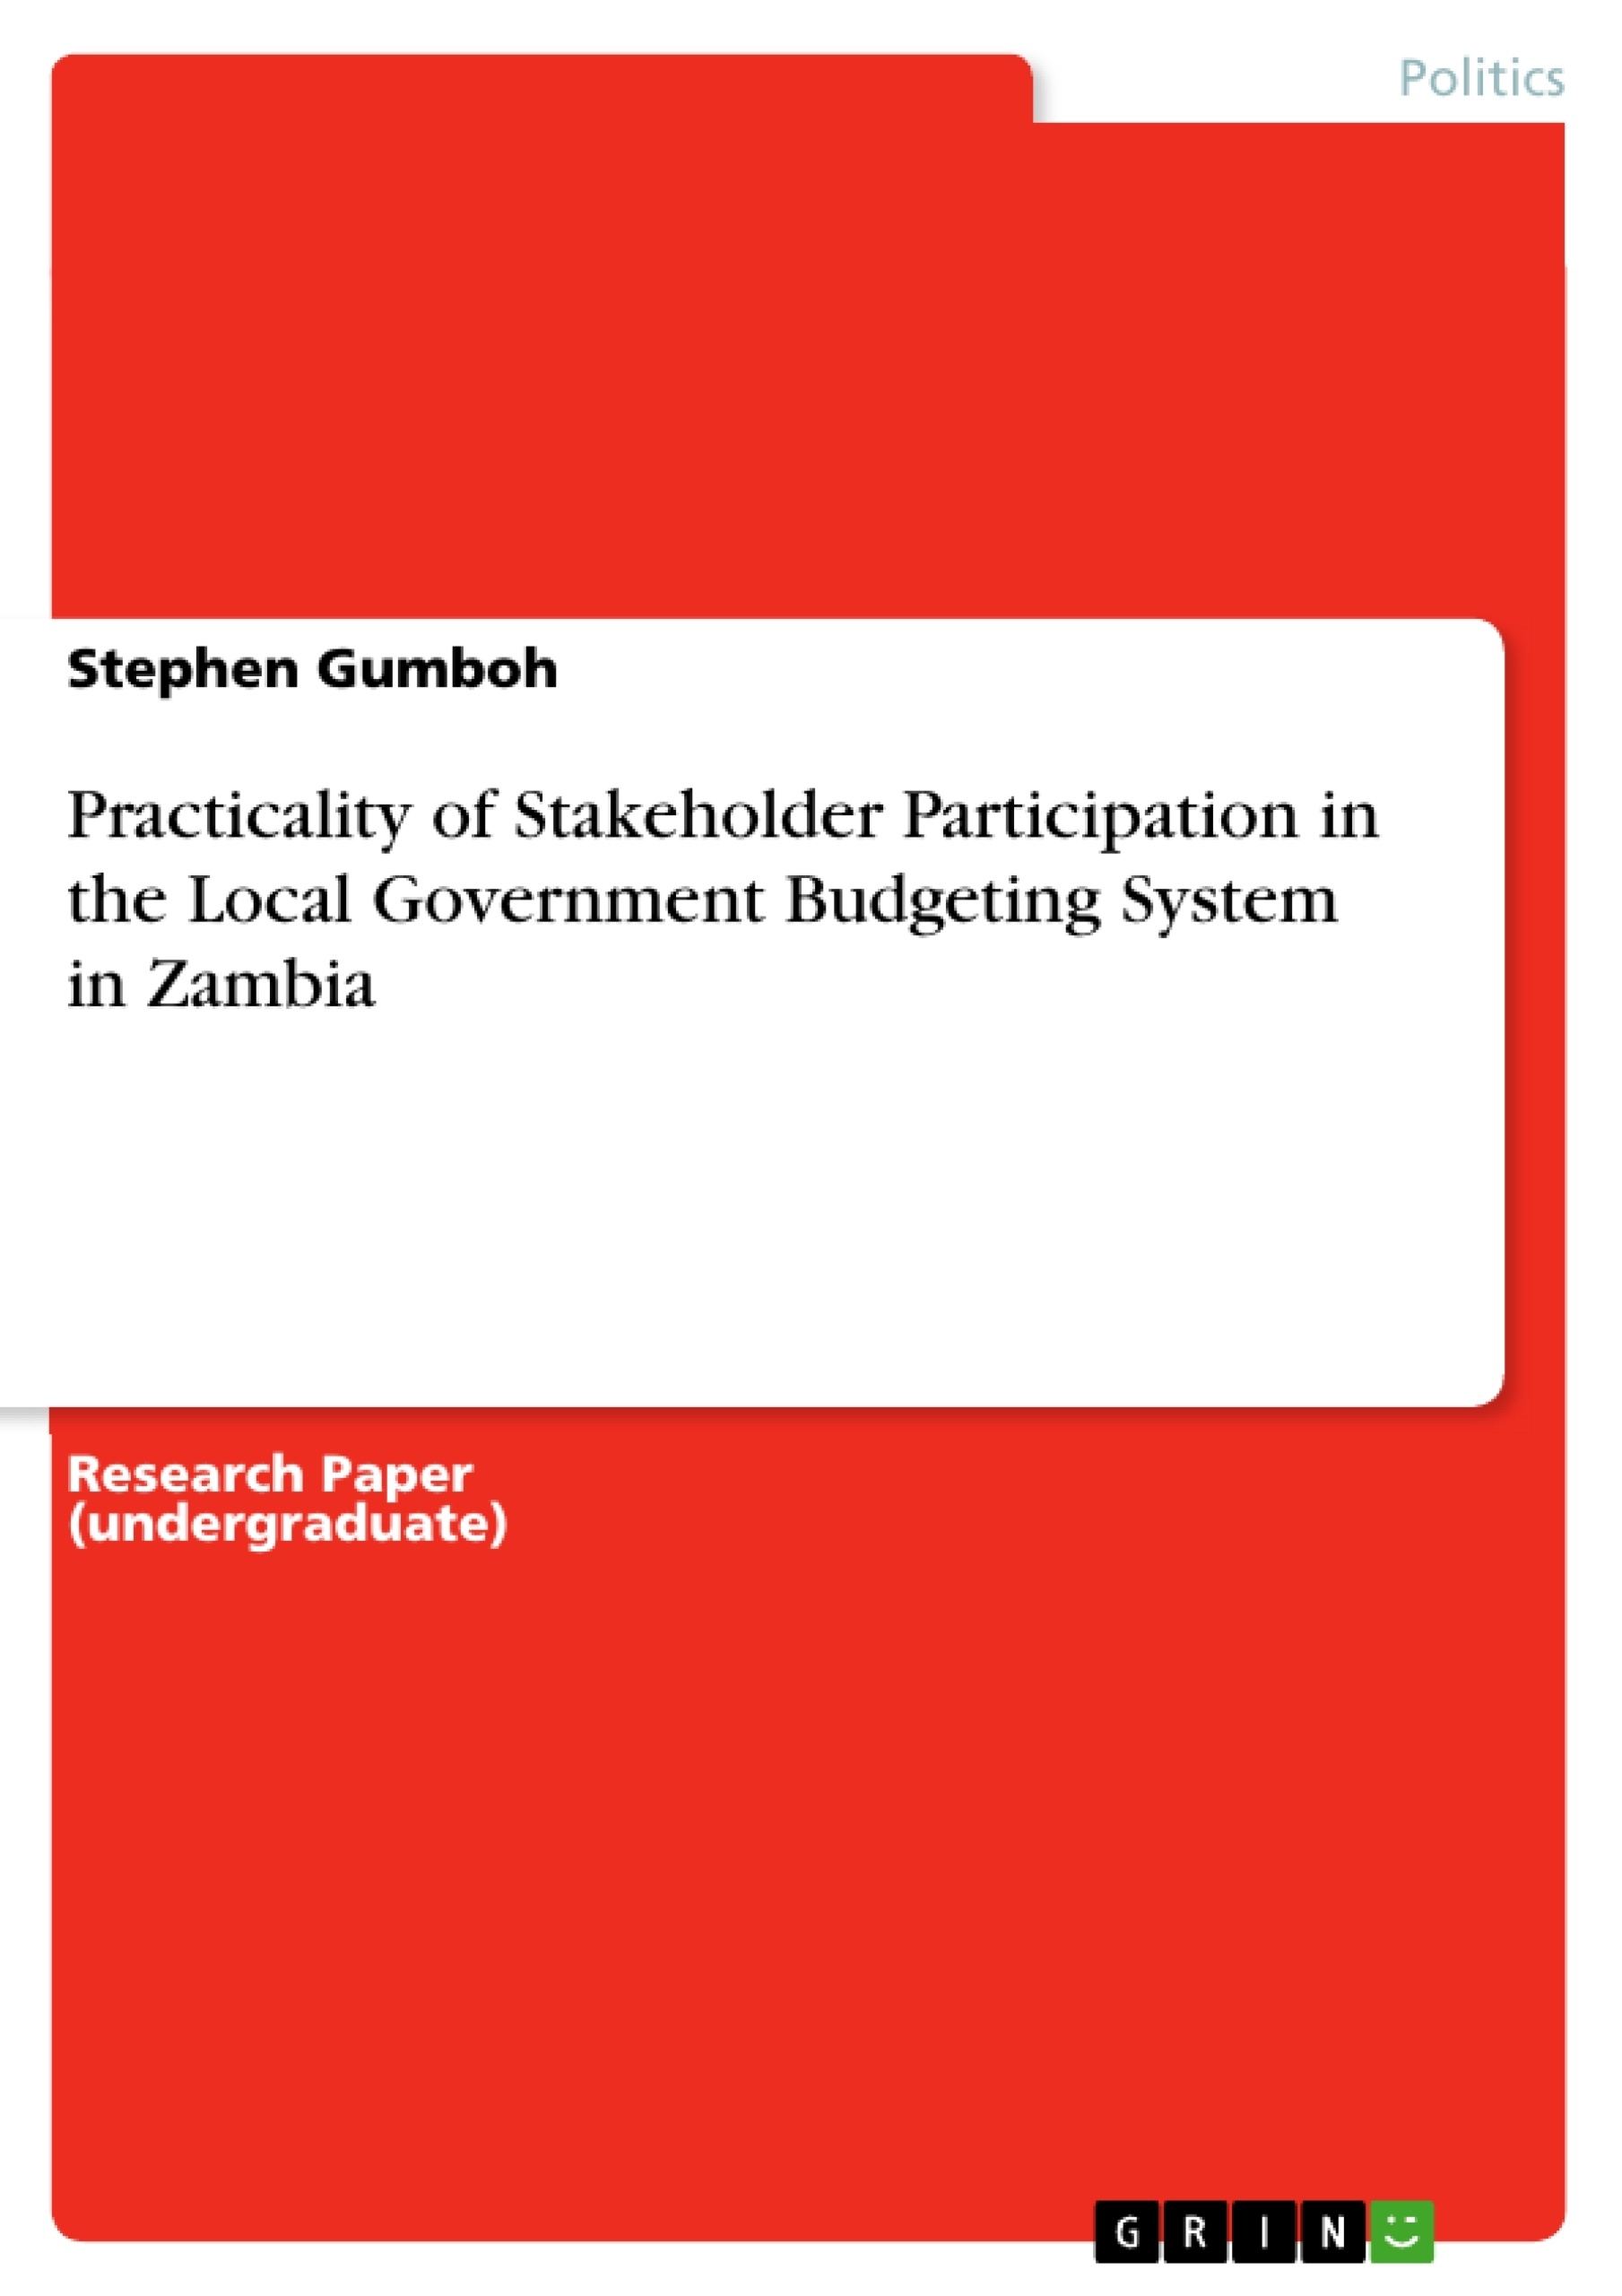 Titre: Practicality of Stakeholder Participation in the Local Government Budgeting System in Zambia